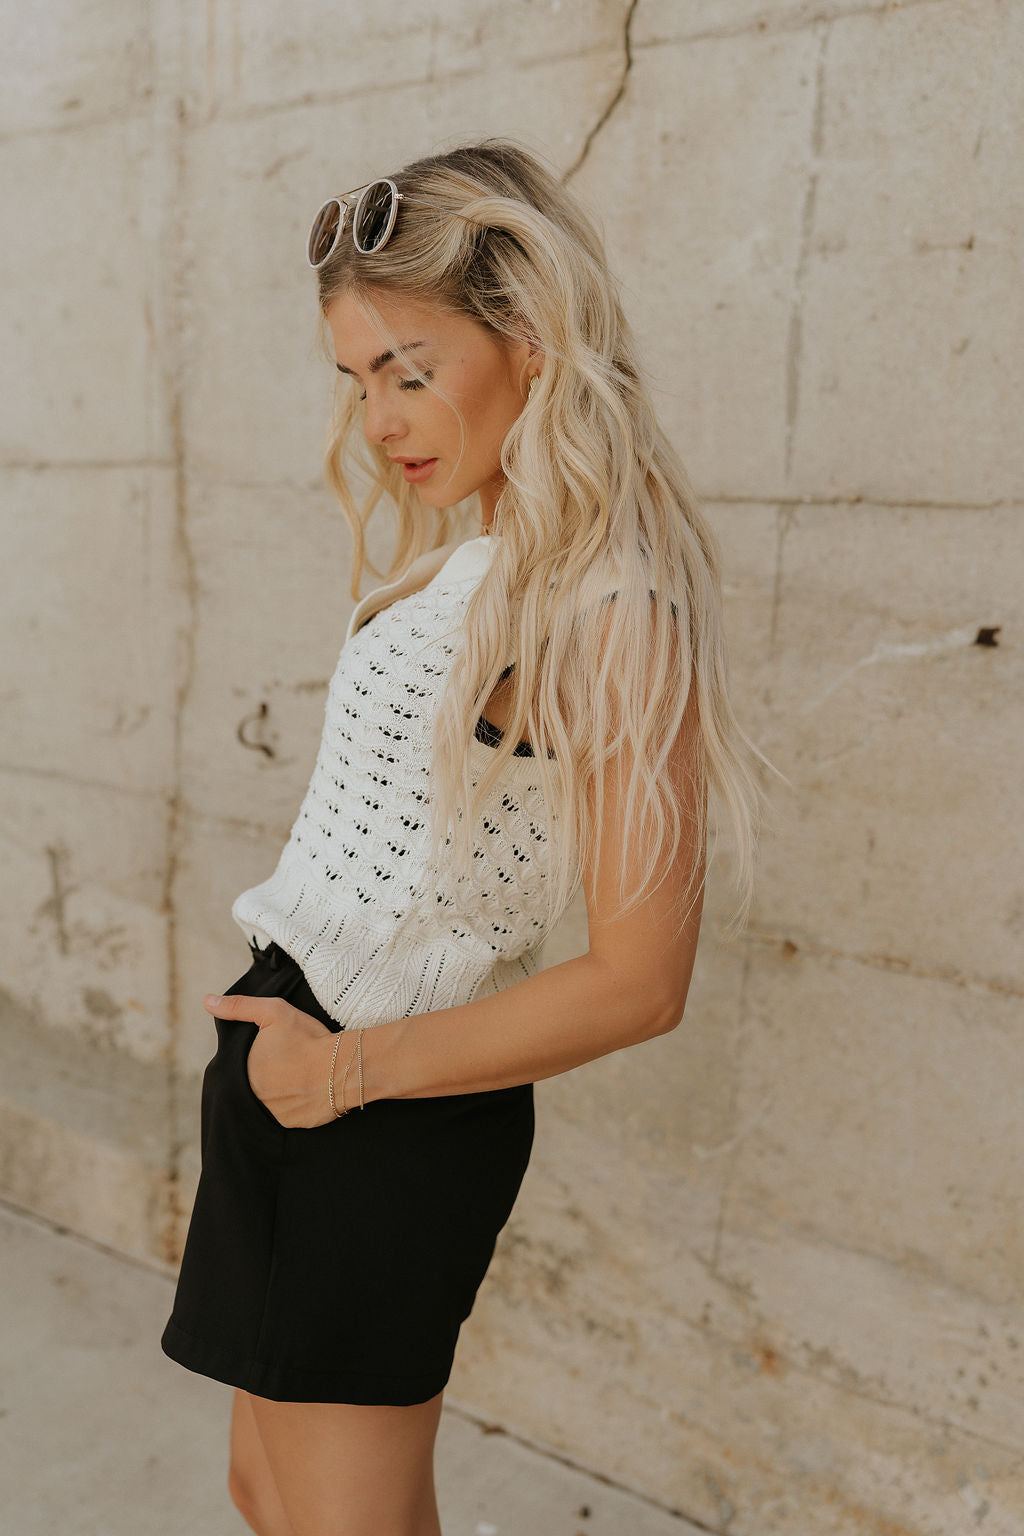 Upper body side view of female model wearing the Ariana Cream Crochet Tank Top that has cream crochet fabric, black trim, scalloped hem, and a collar. Worn with black shorts.